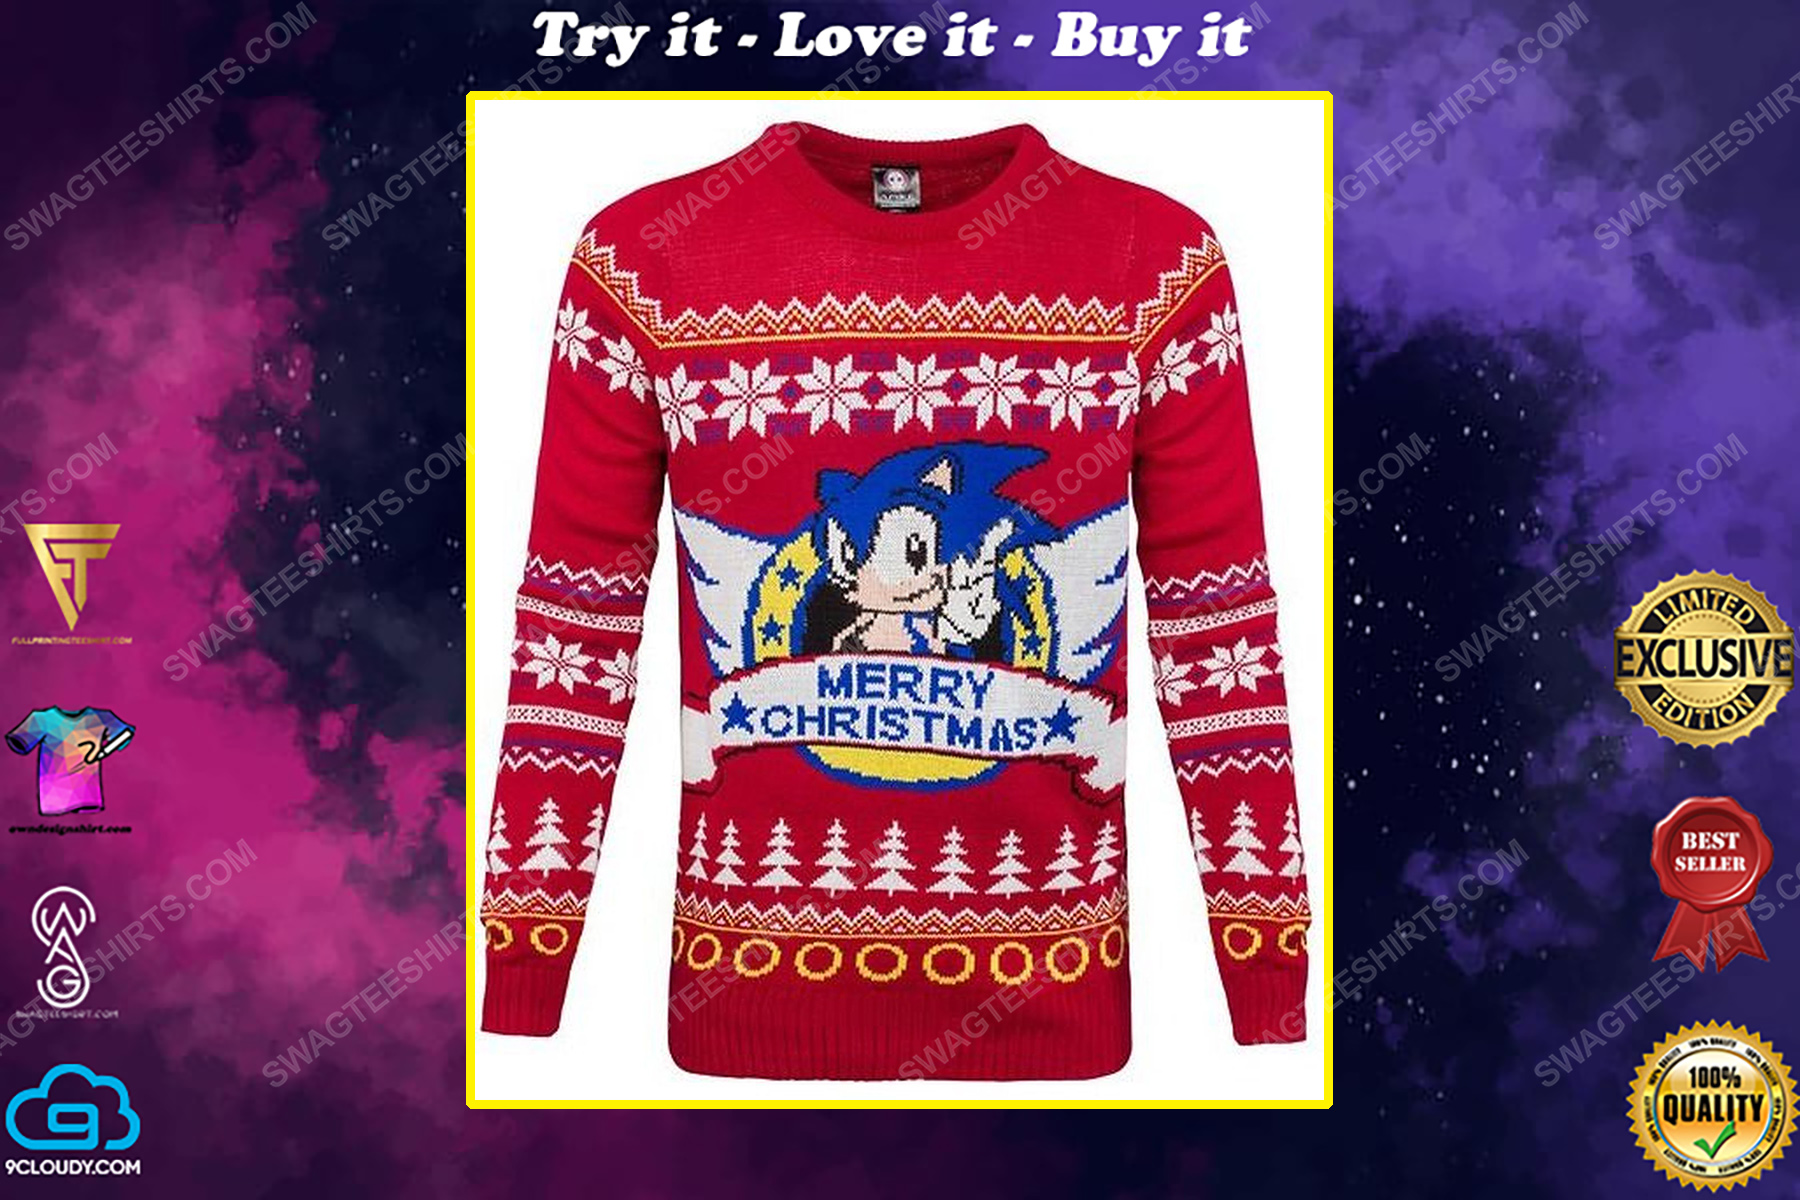 Sonic the hedgehog and merry christmas full print ugly christmas sweater